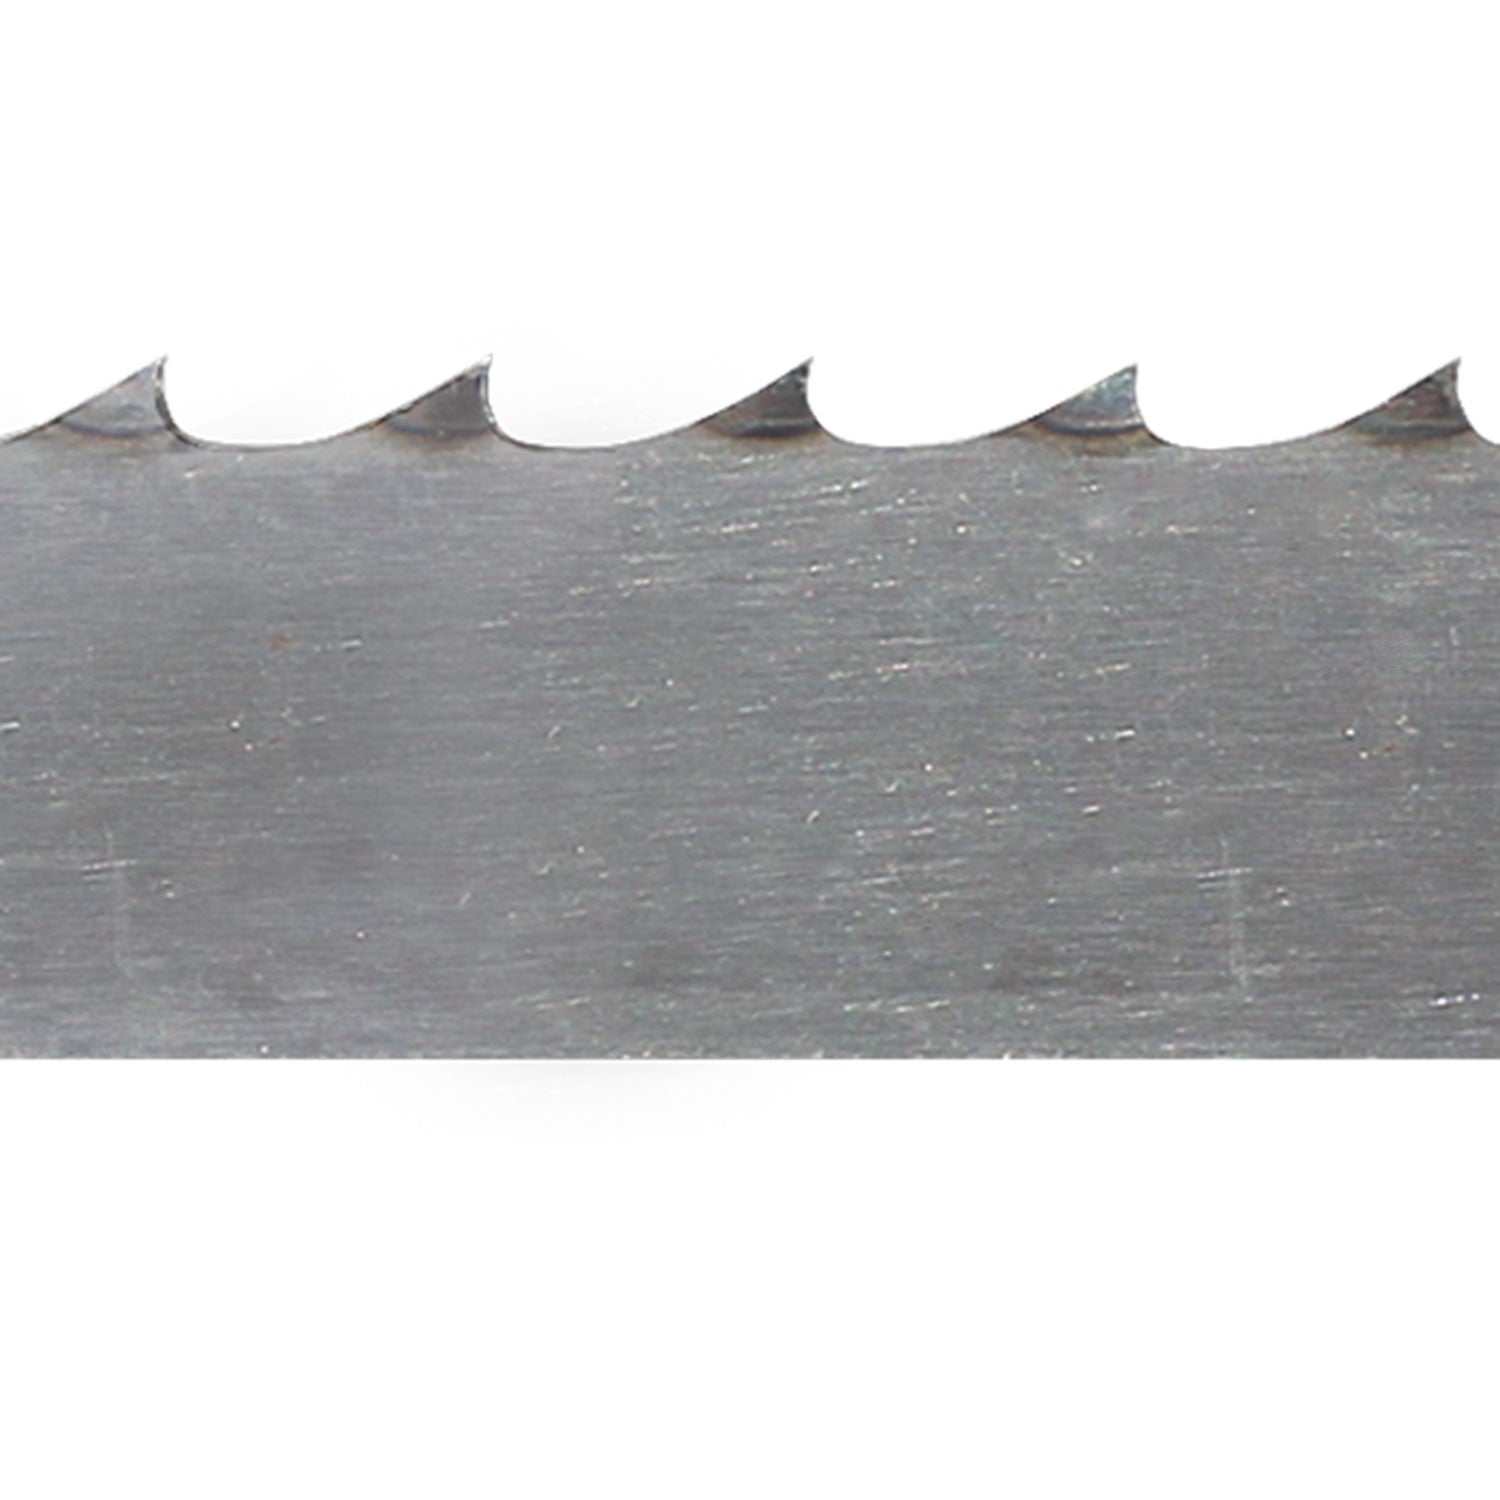 Meat Band Saw Blade - Carcass Splitter - 173 in. x 3/4 in. x .022 in. x 3 TPI - Pack of 4